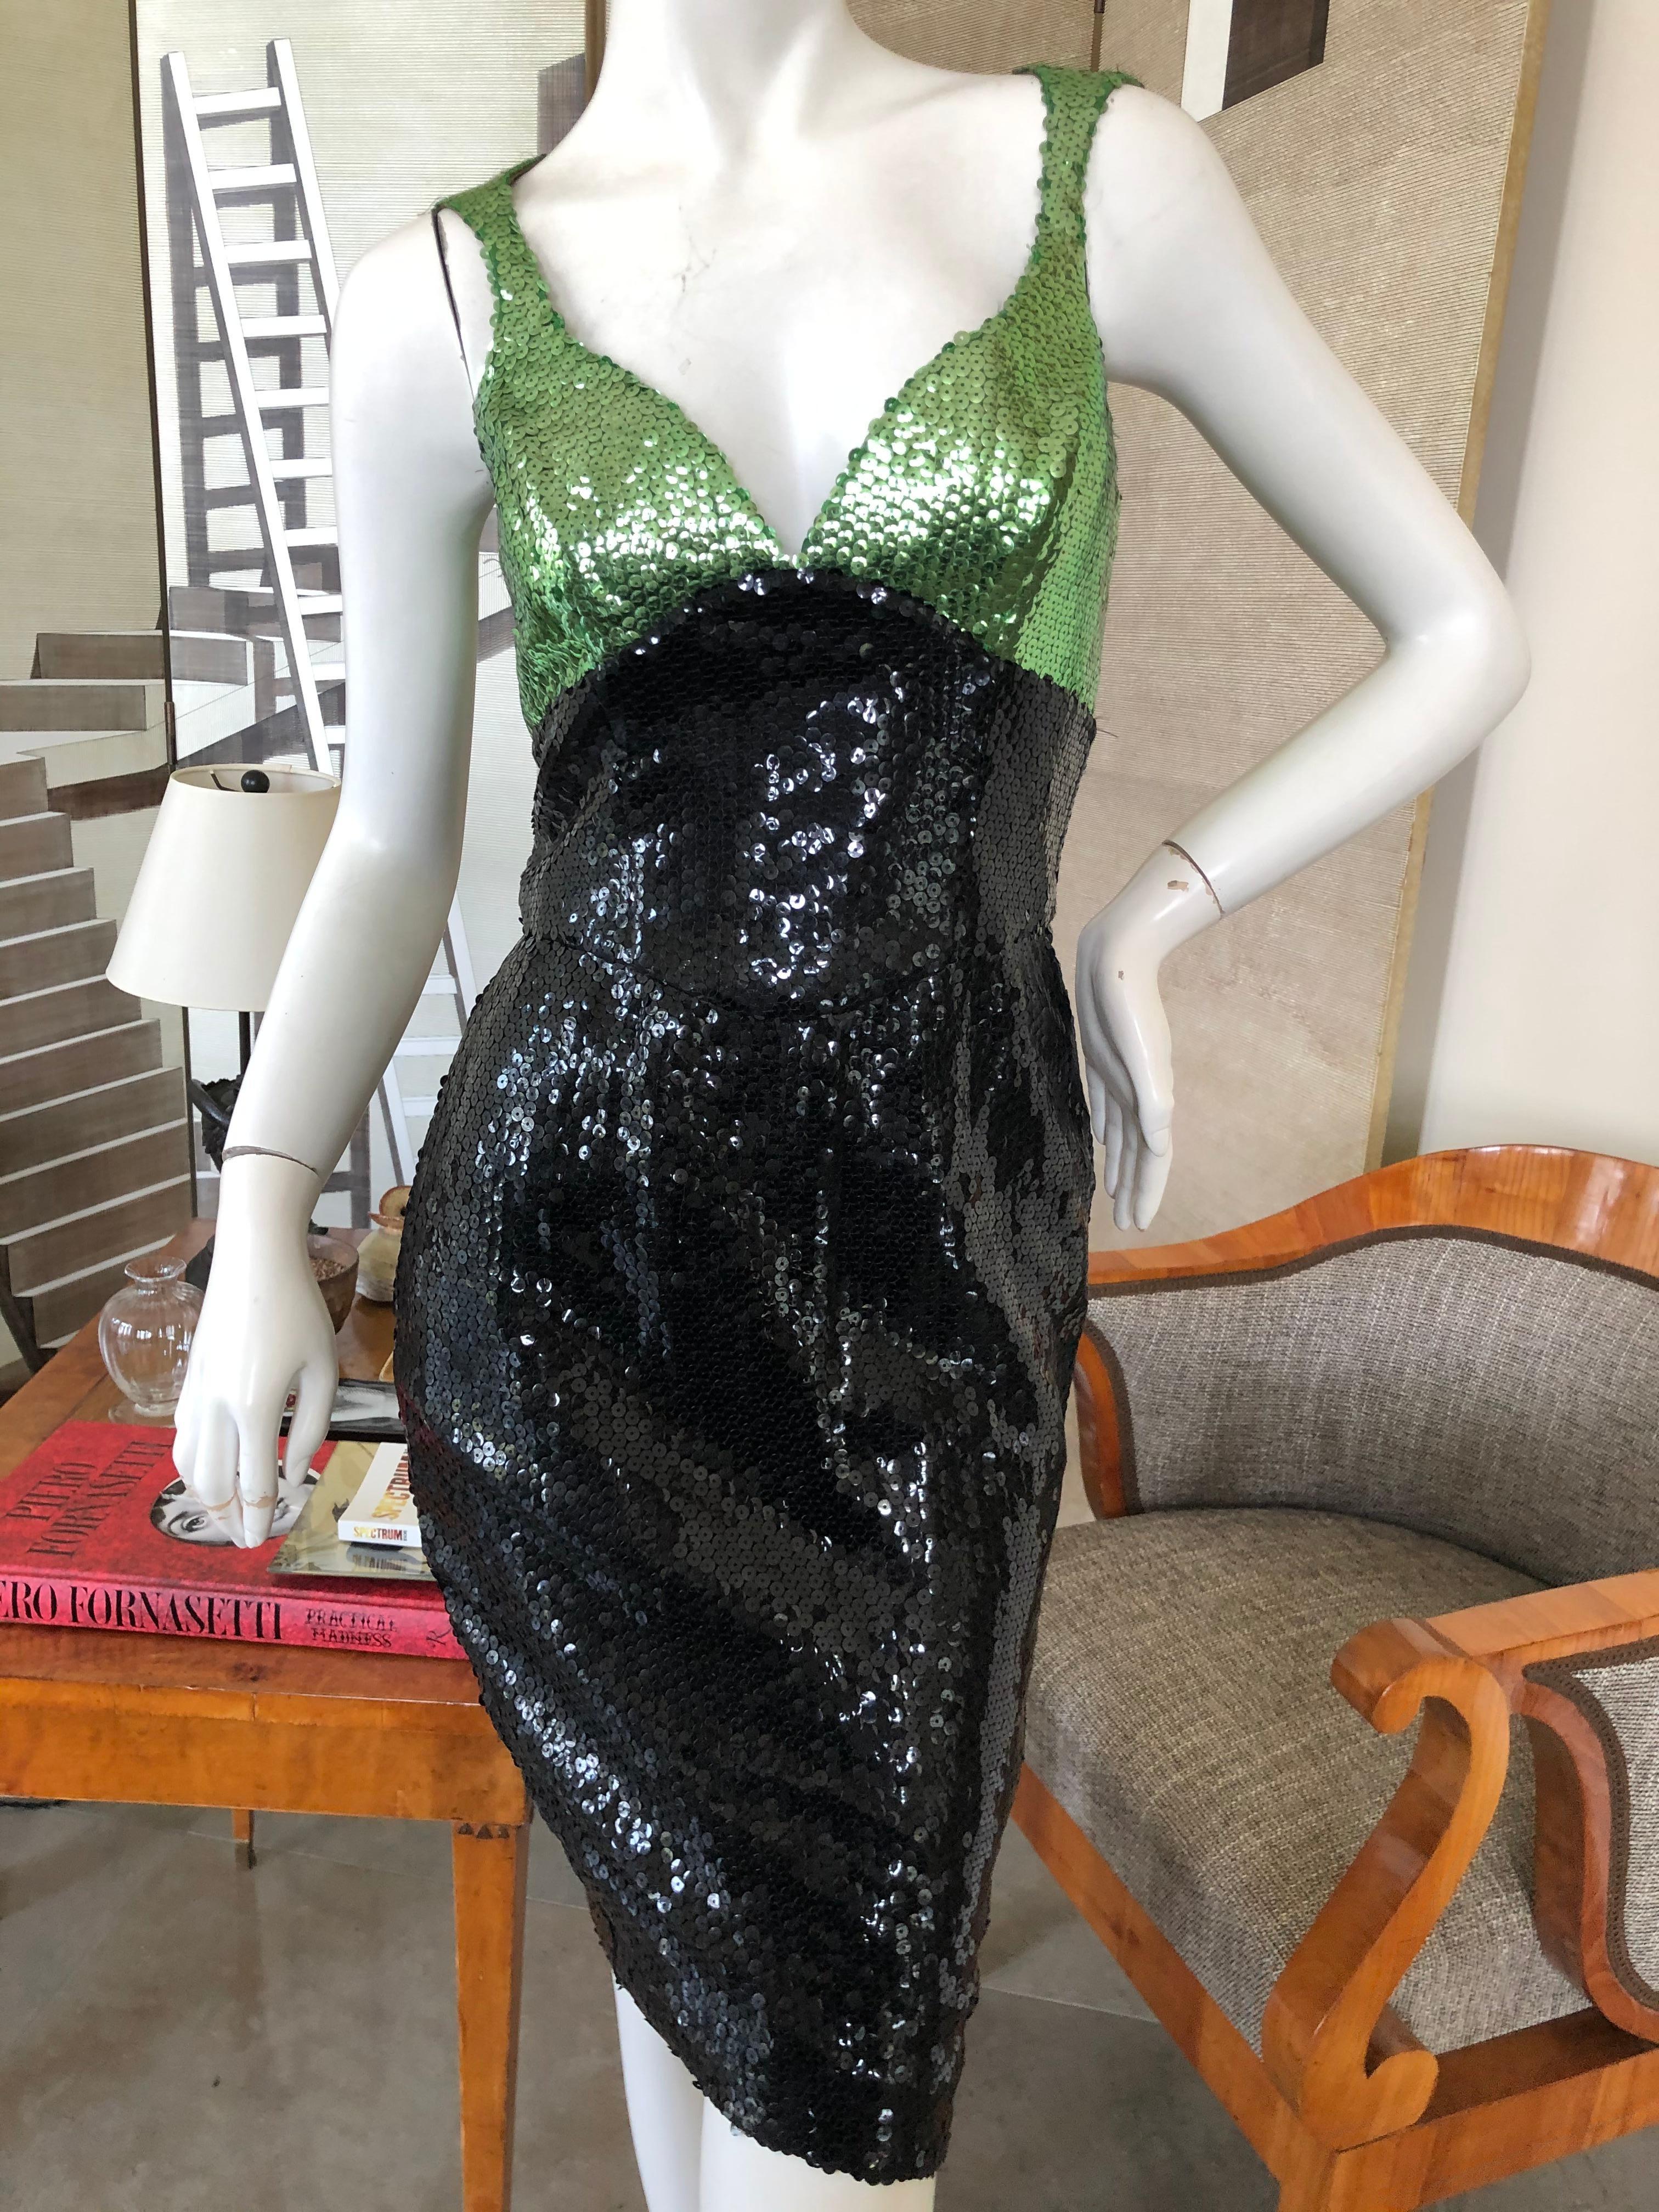 Thierry Mugler Vintage 80's Super Sexy Sequin Cocktail Dress.
 This is so much prettier than the photos show.
Pale green and black sequins
 Size 38
Bust 36